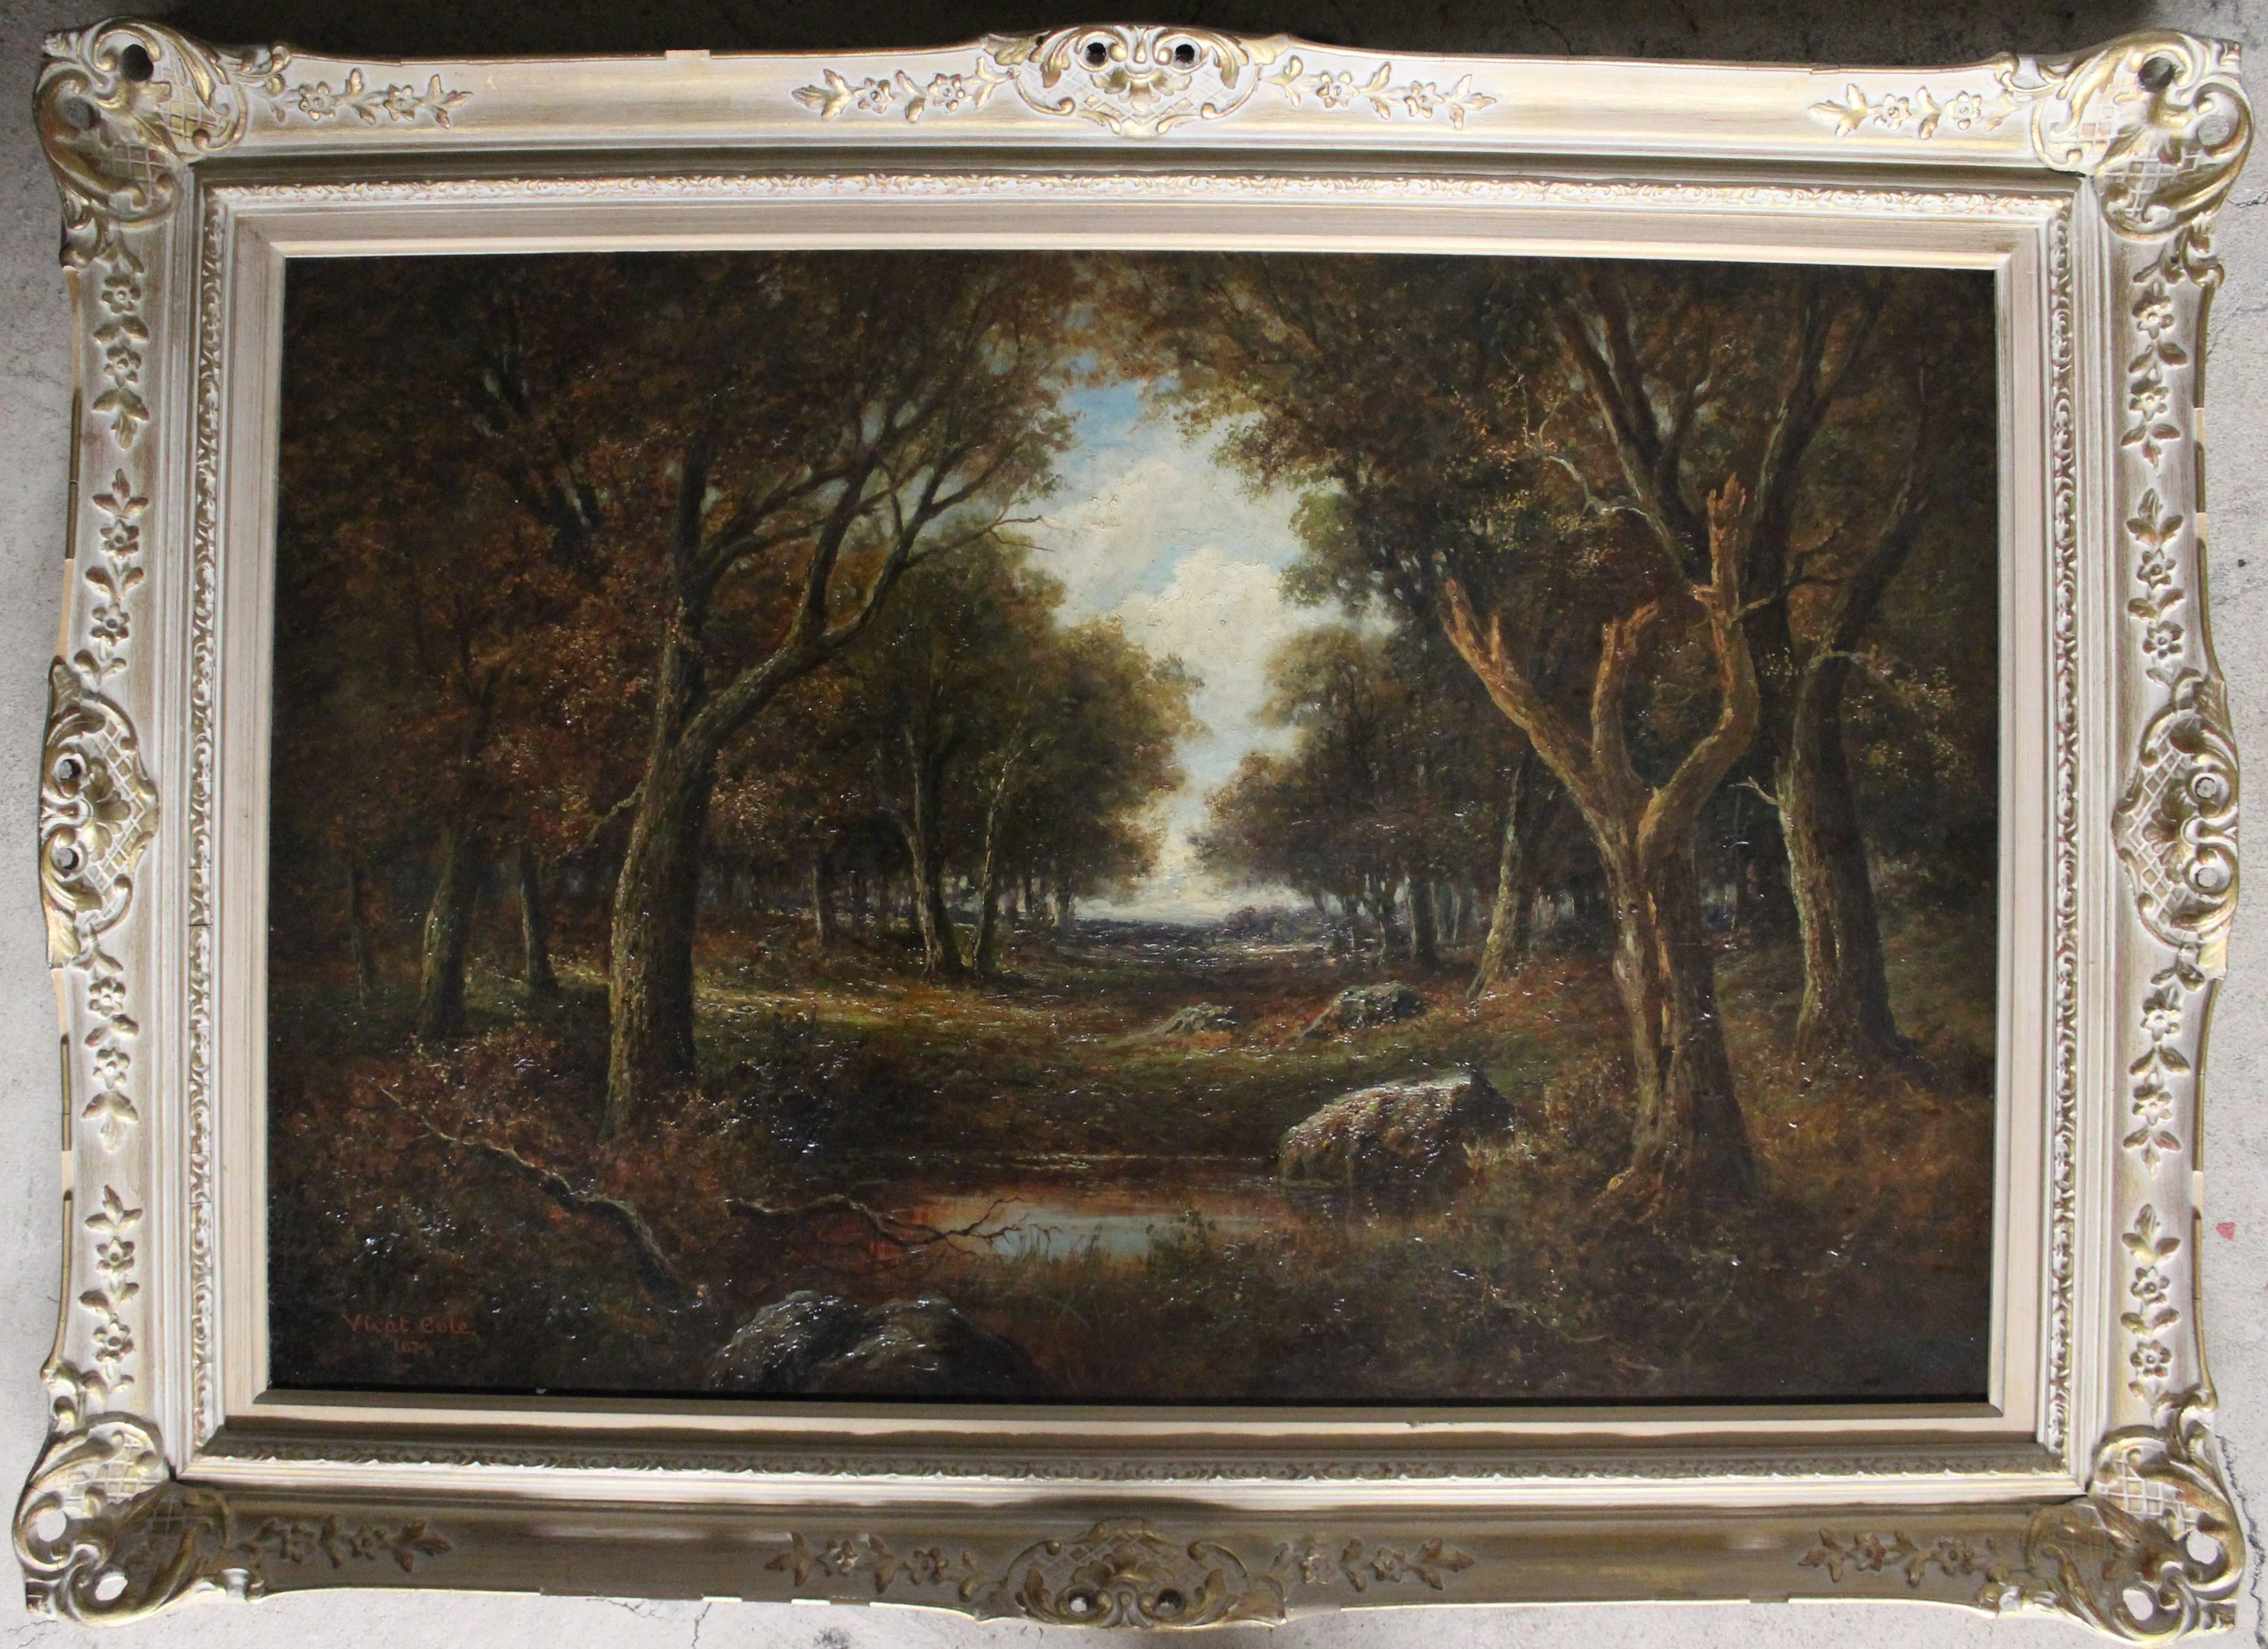 George Vicat Cole (British 1833-1893) 

Size without frame: 24 high x 36 wide
Size with frame: 32 1/4 high x 44 1/4 wide


George Vicat Cole (usually known as Vicat Cole) was an important landscape painter working in the mid-19th century. In